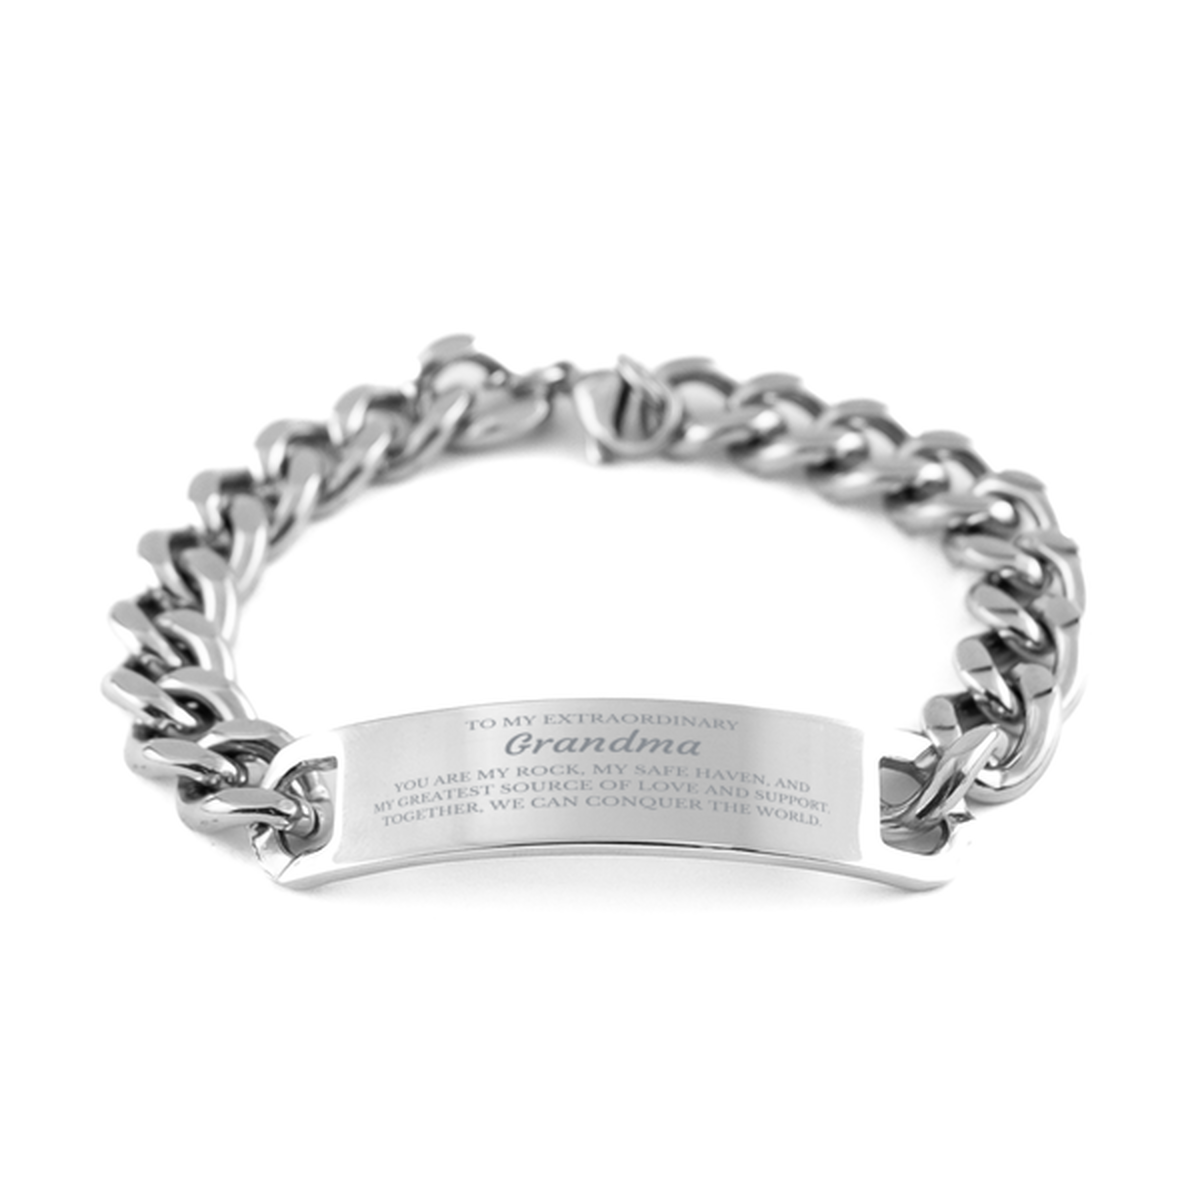 To My Extraordinary Grandma Gifts, Together, we can conquer the world, Birthday Cuban Chain Stainless Steel Bracelet For Grandma, Christmas Gifts For Grandma